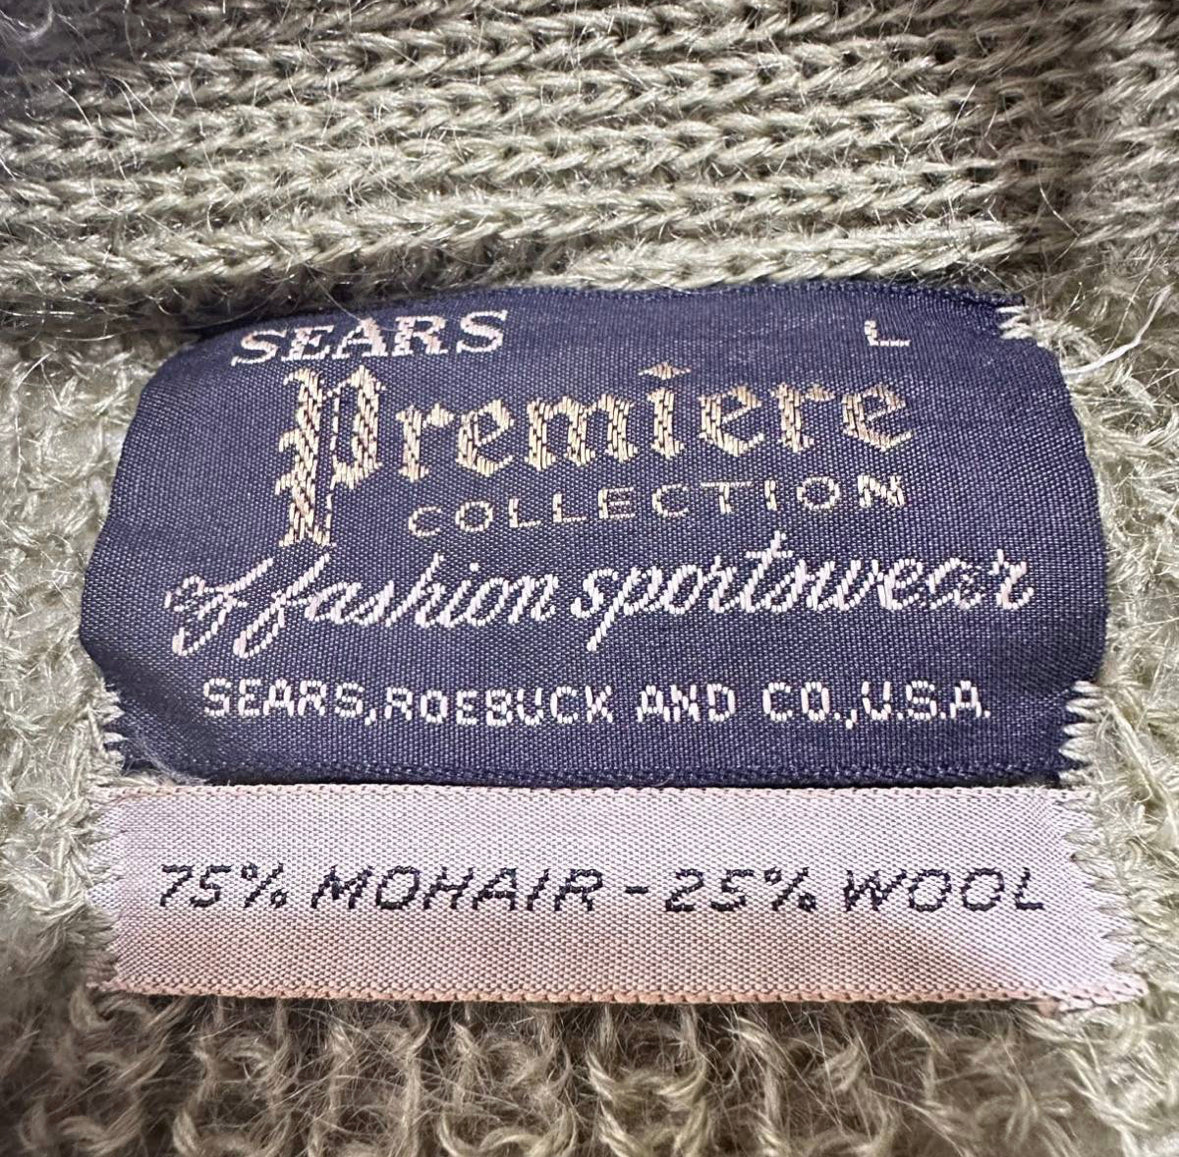 Sears Premiere COLLECTION mohair cardigan vintage 60s